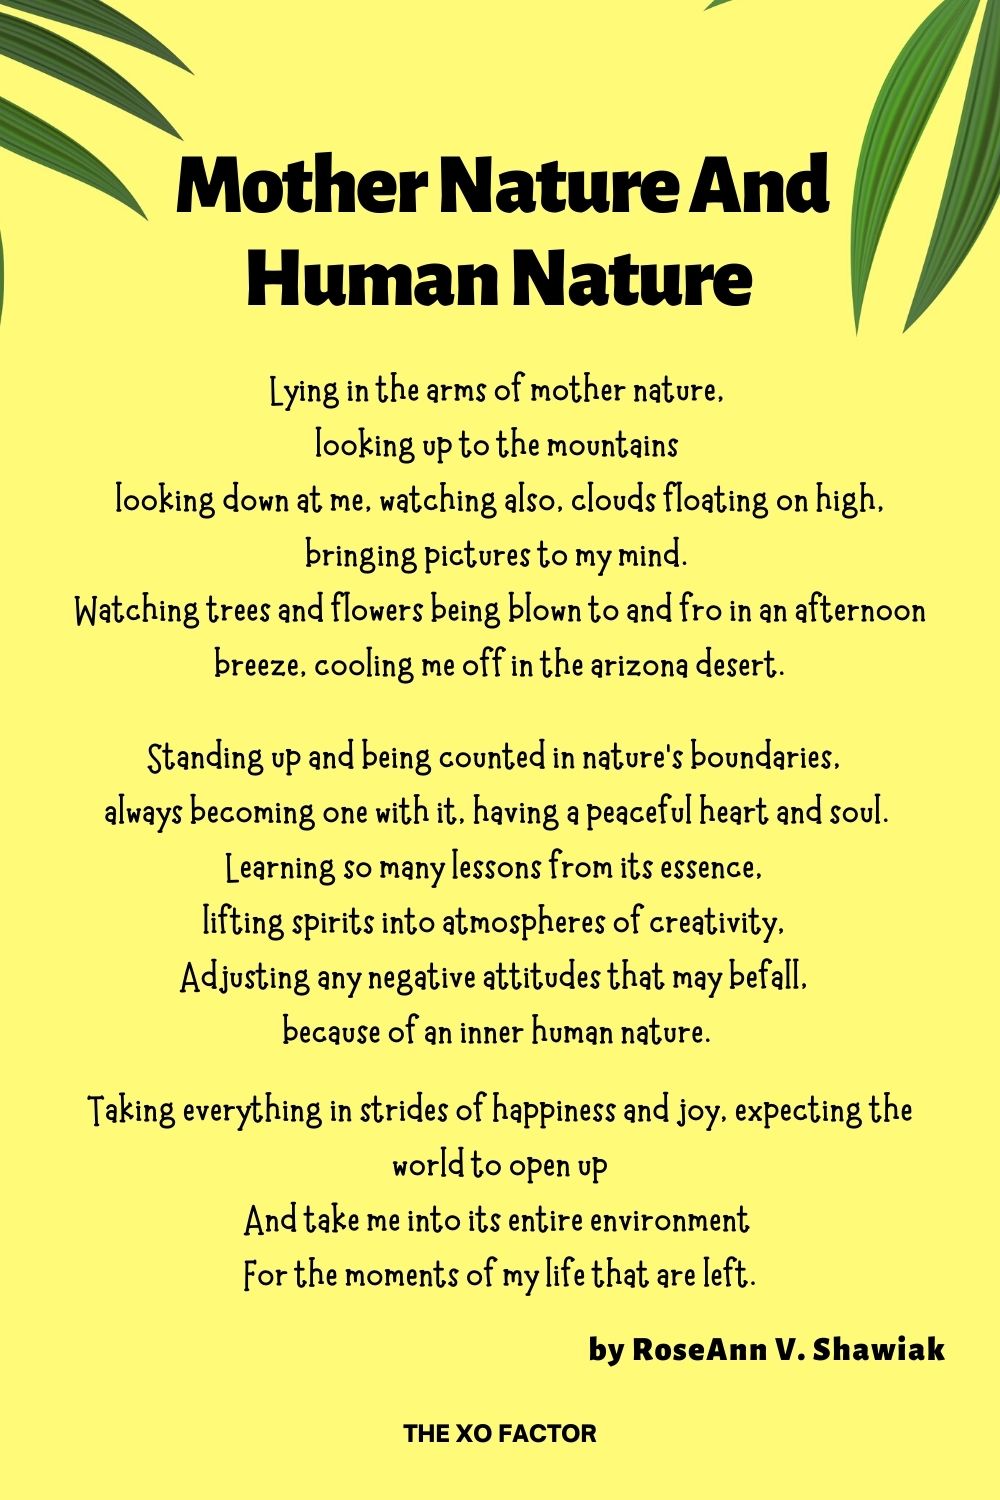 Mother Nature And Human Nature Poem by RoseAnn V. Shawiak